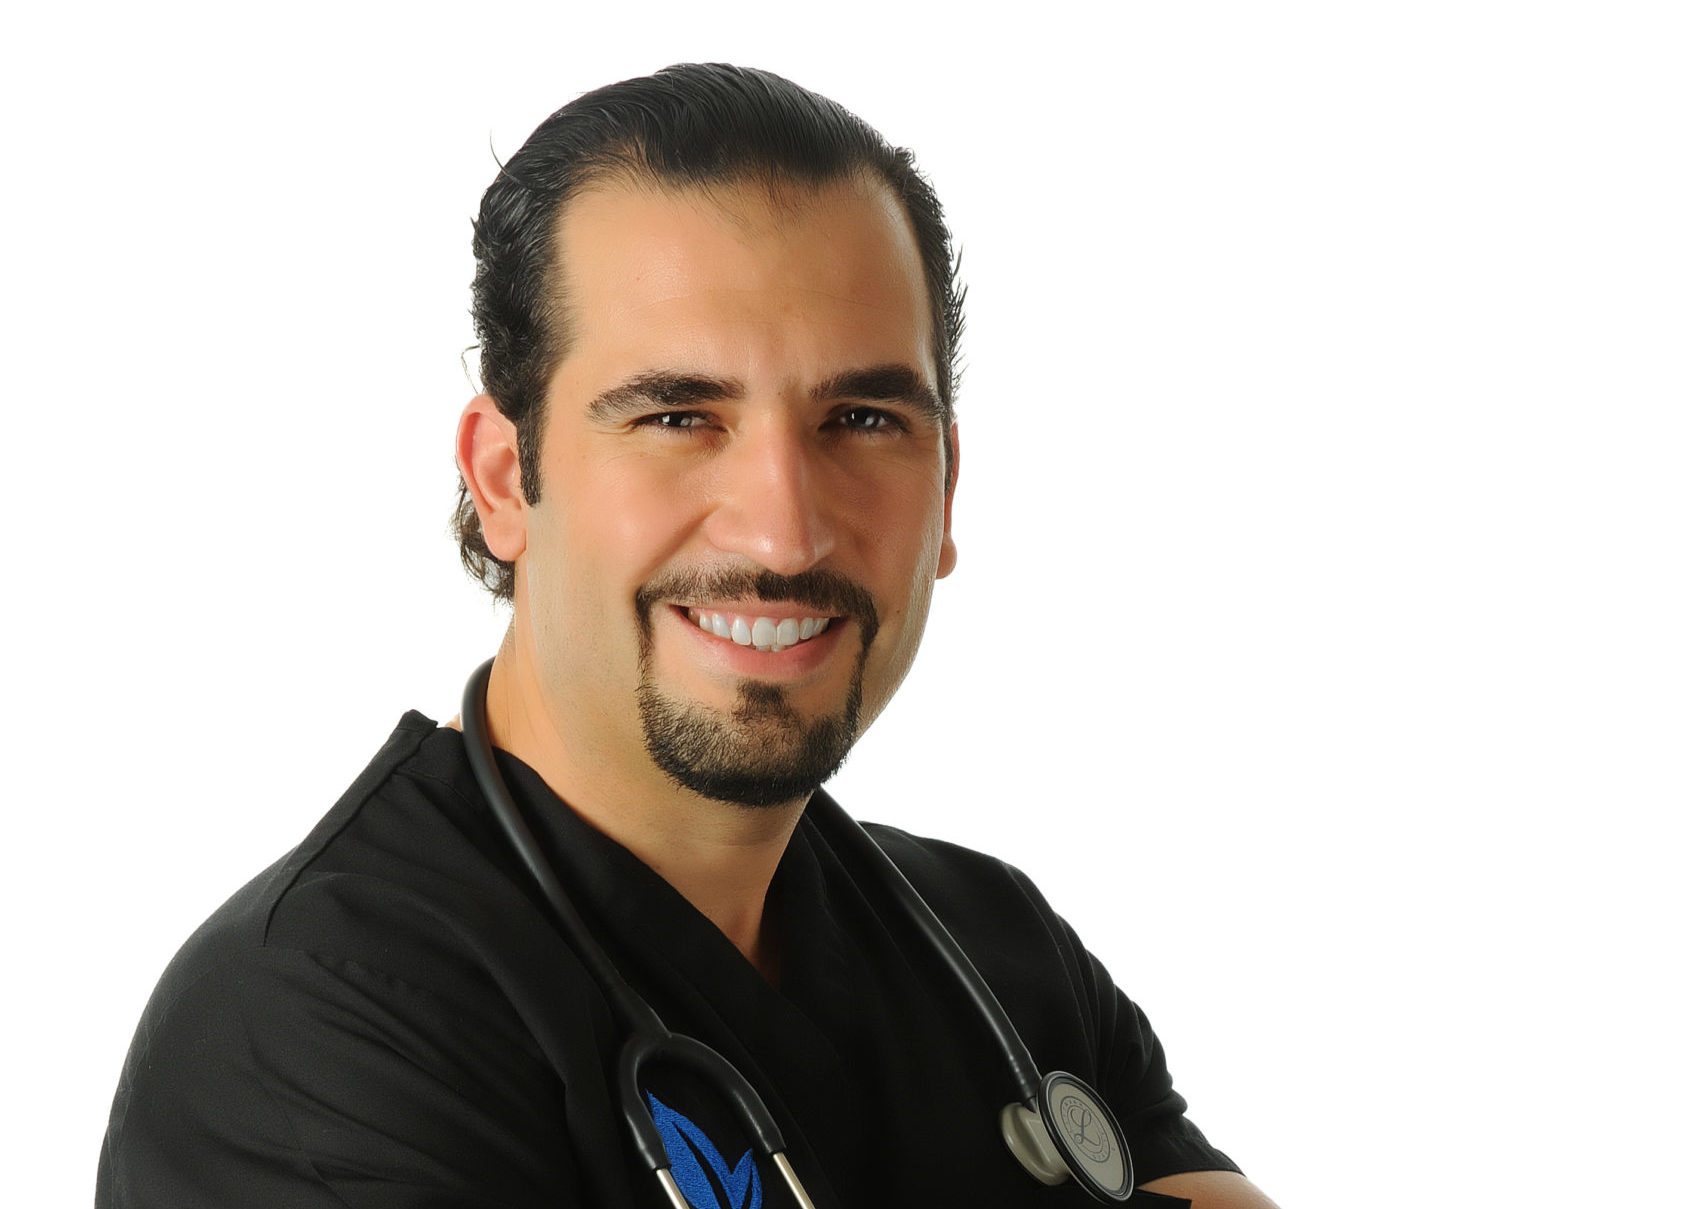 Meet Dr. Guillermo Alvarez: Leading Surgeon and Best-Selling Author